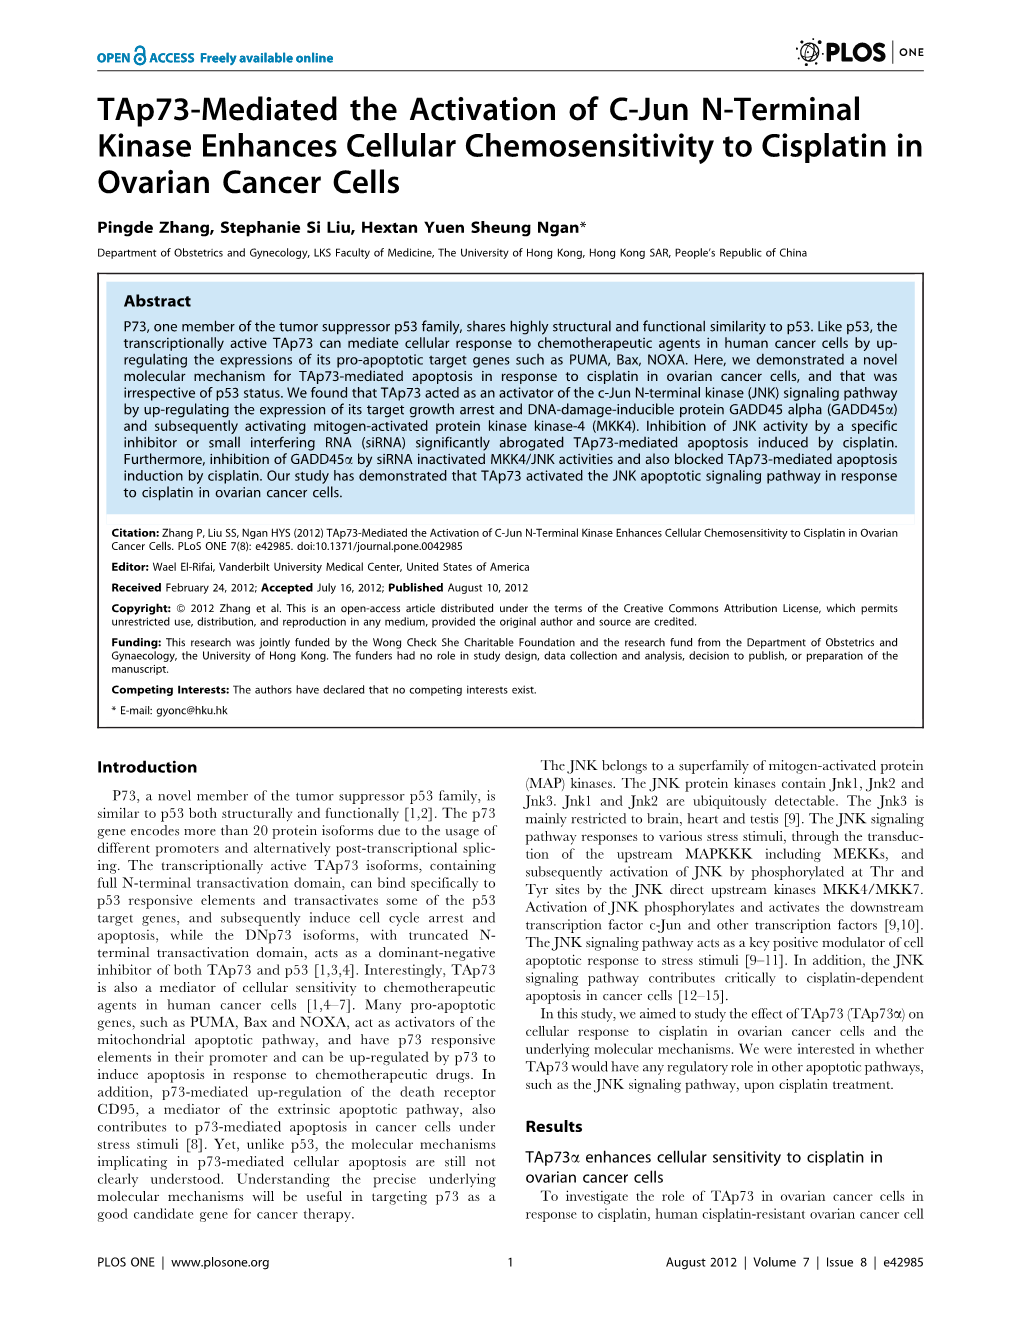 Tap73-Mediated the Activation of C-Jun N-Terminal Kinase Enhances Cellular Chemosensitivity to Cisplatin in Ovarian Cancer Cells